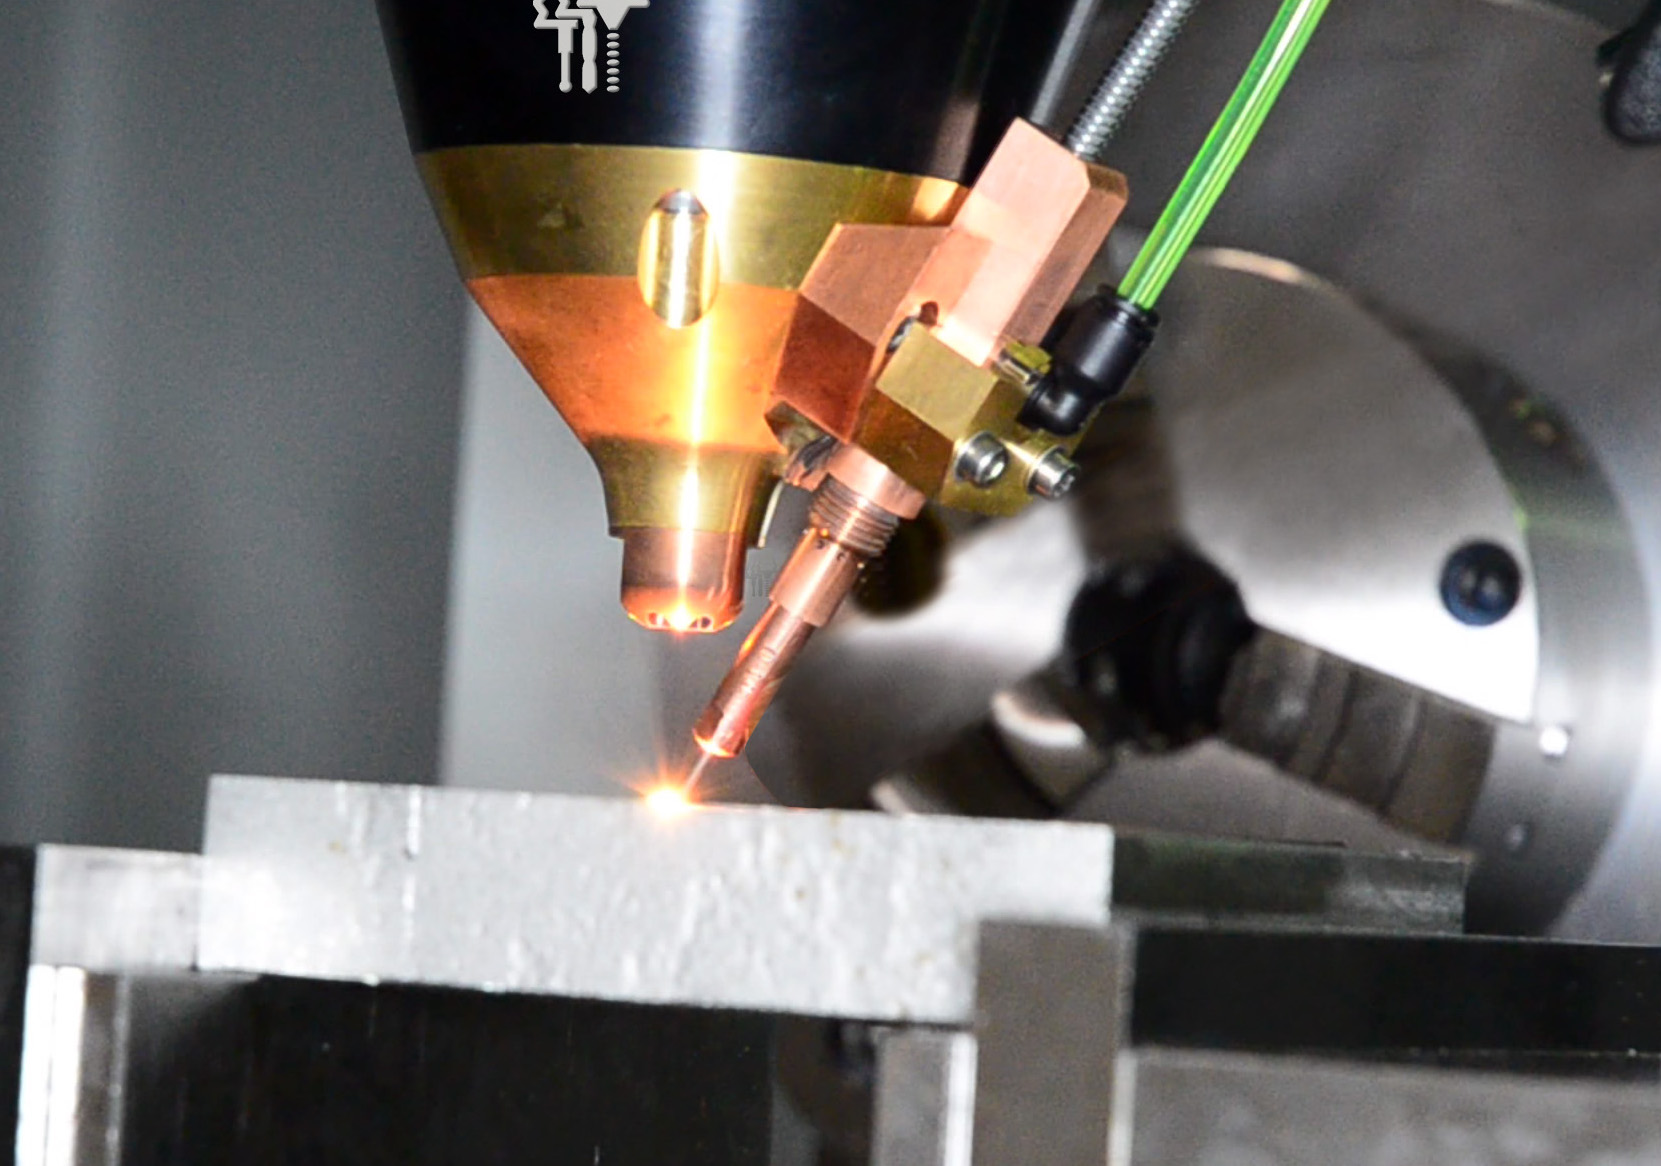 HMT has partnered with TWI and Epoch to develop a new wire feed system for laser 3D printing. Photo via HMT.